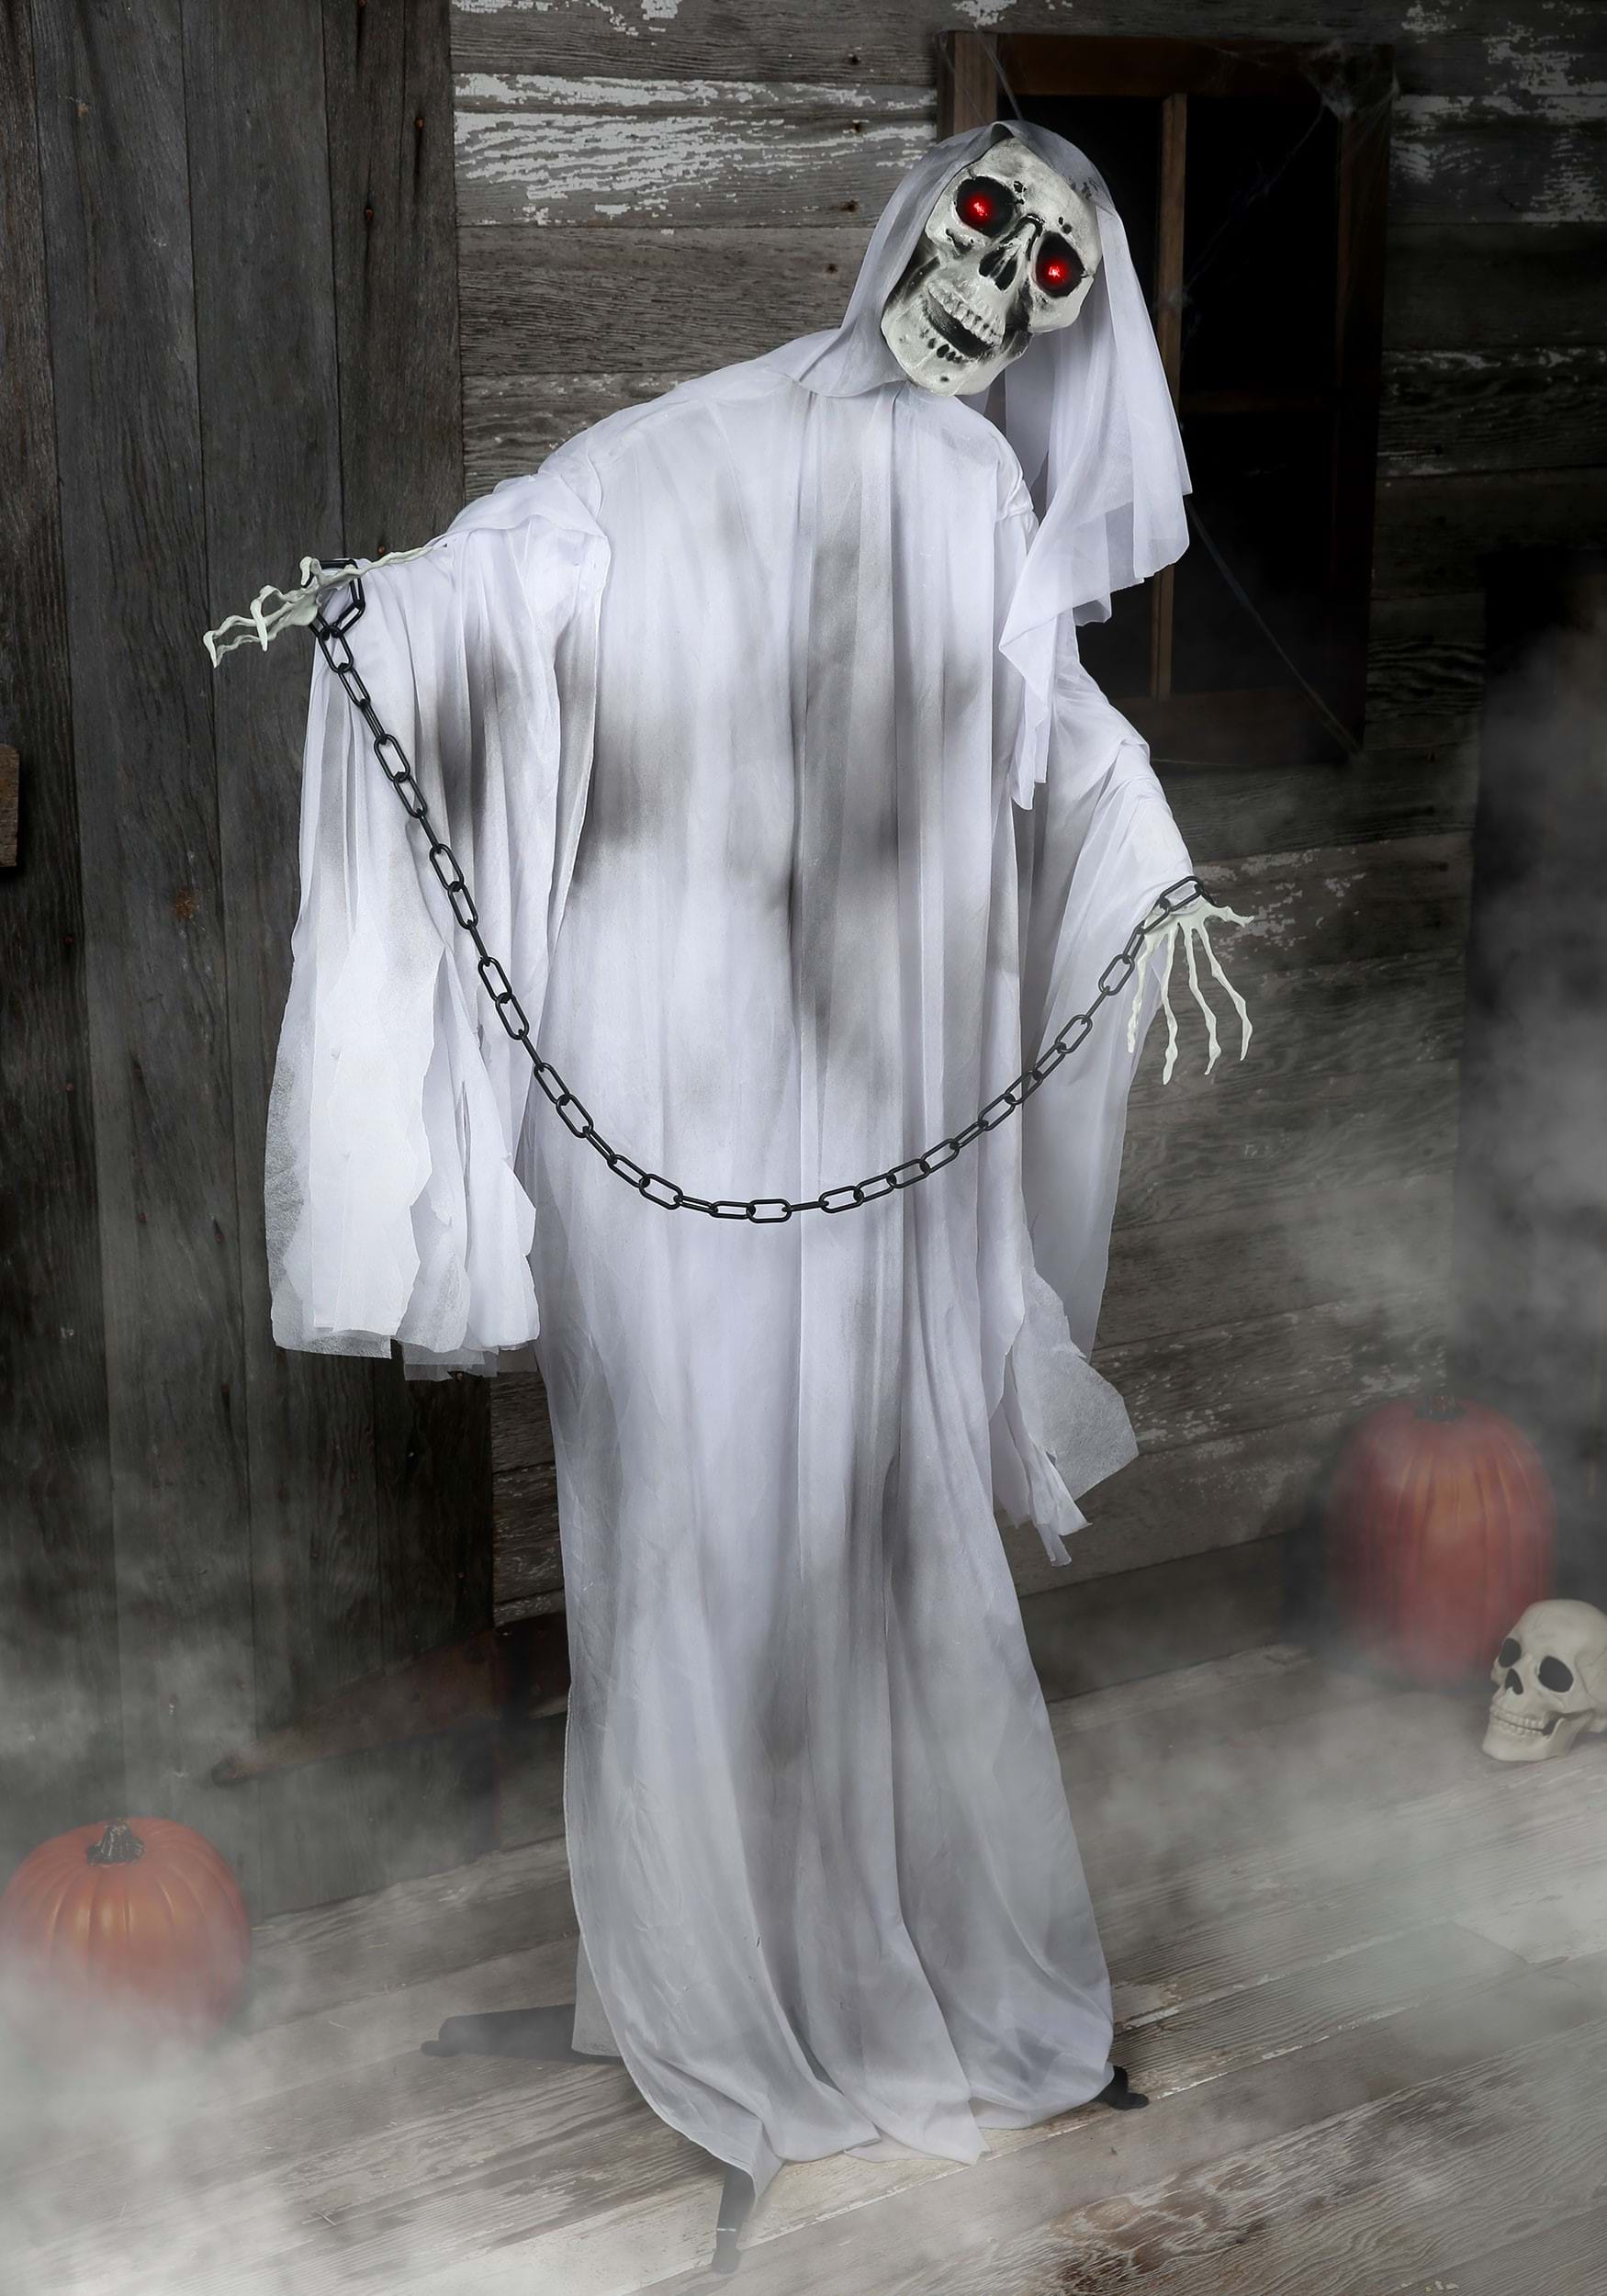 Halloween Inspiration: Silly Monster and Ghost Doors and more